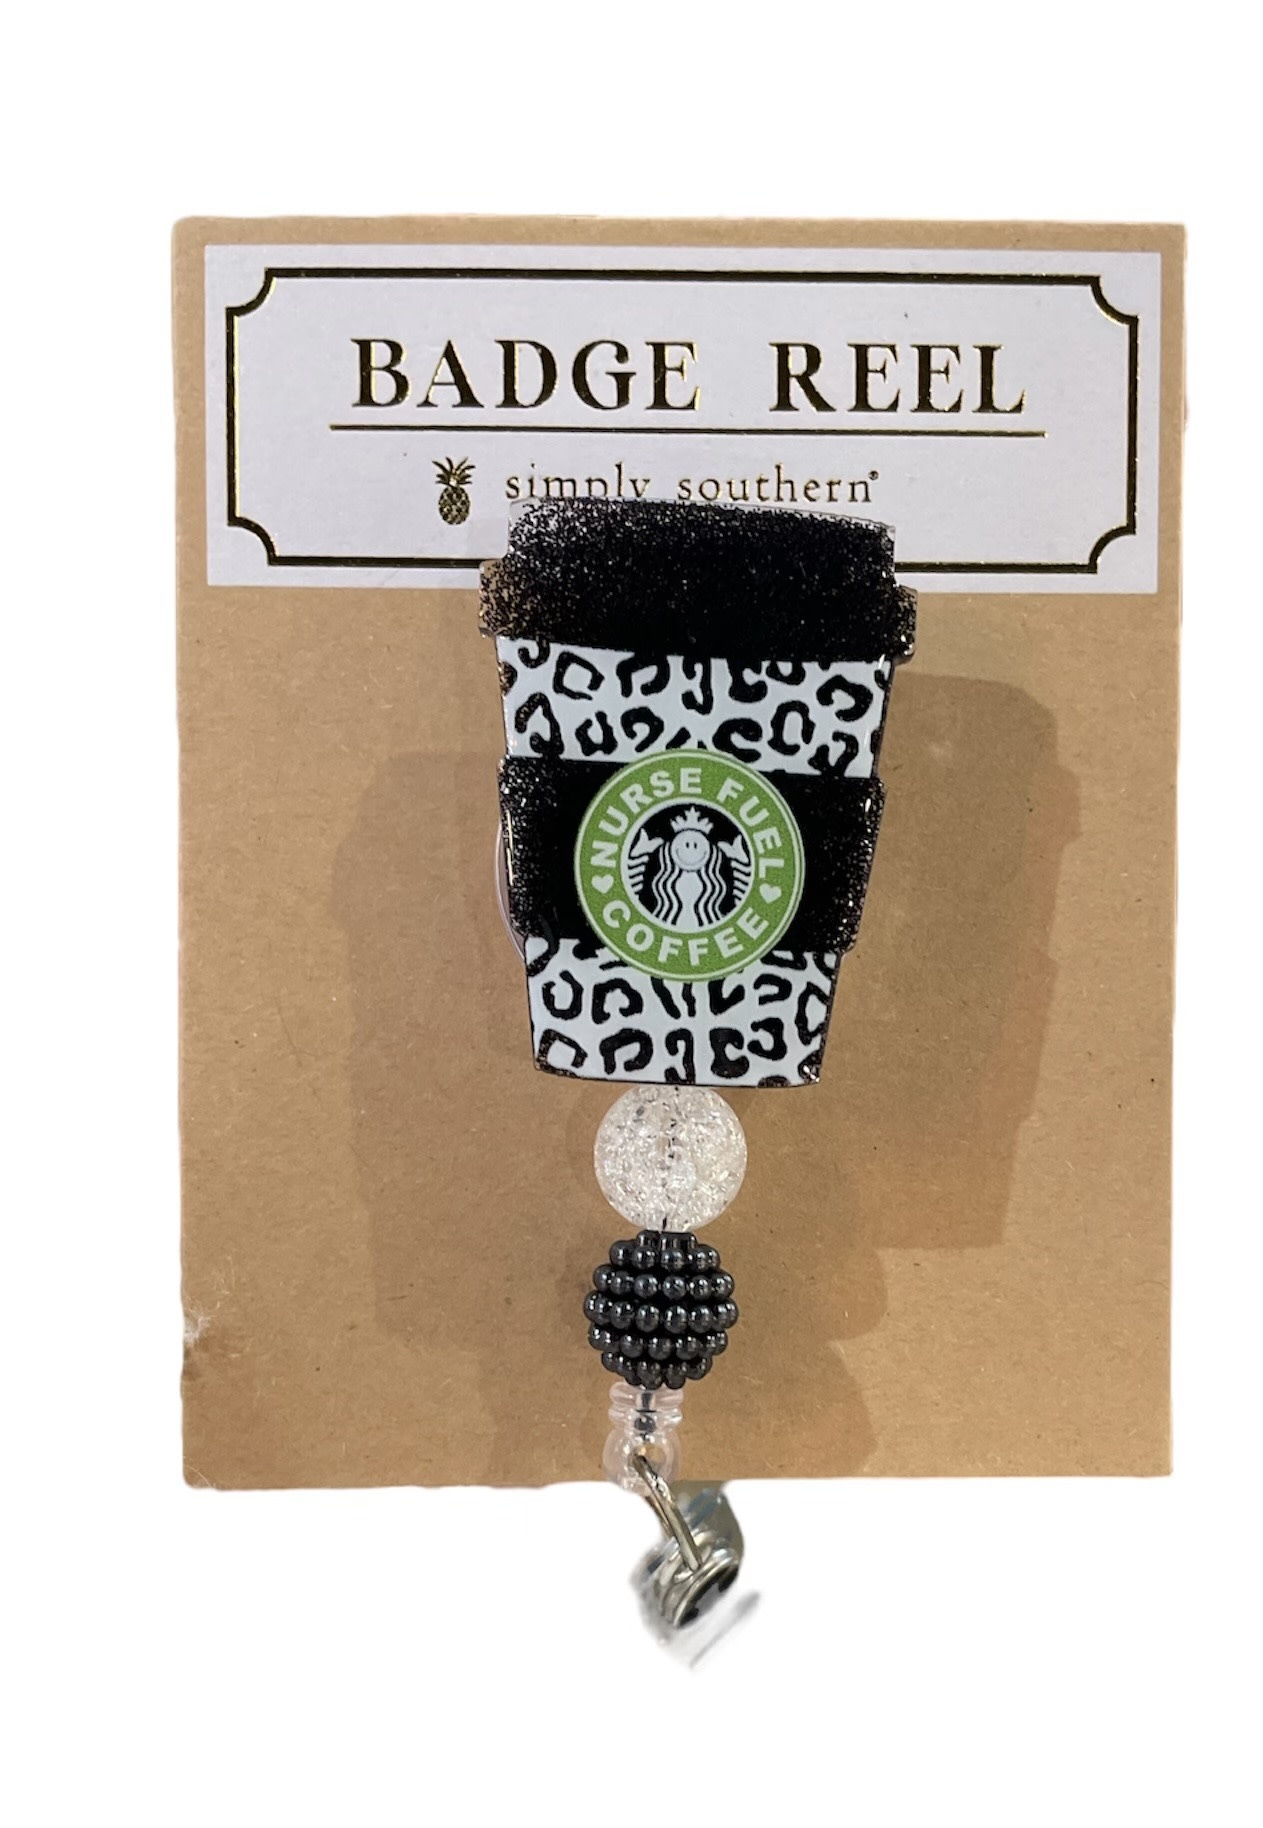 BADGE REEL - BLACK COFFEE - Southern Accents MS